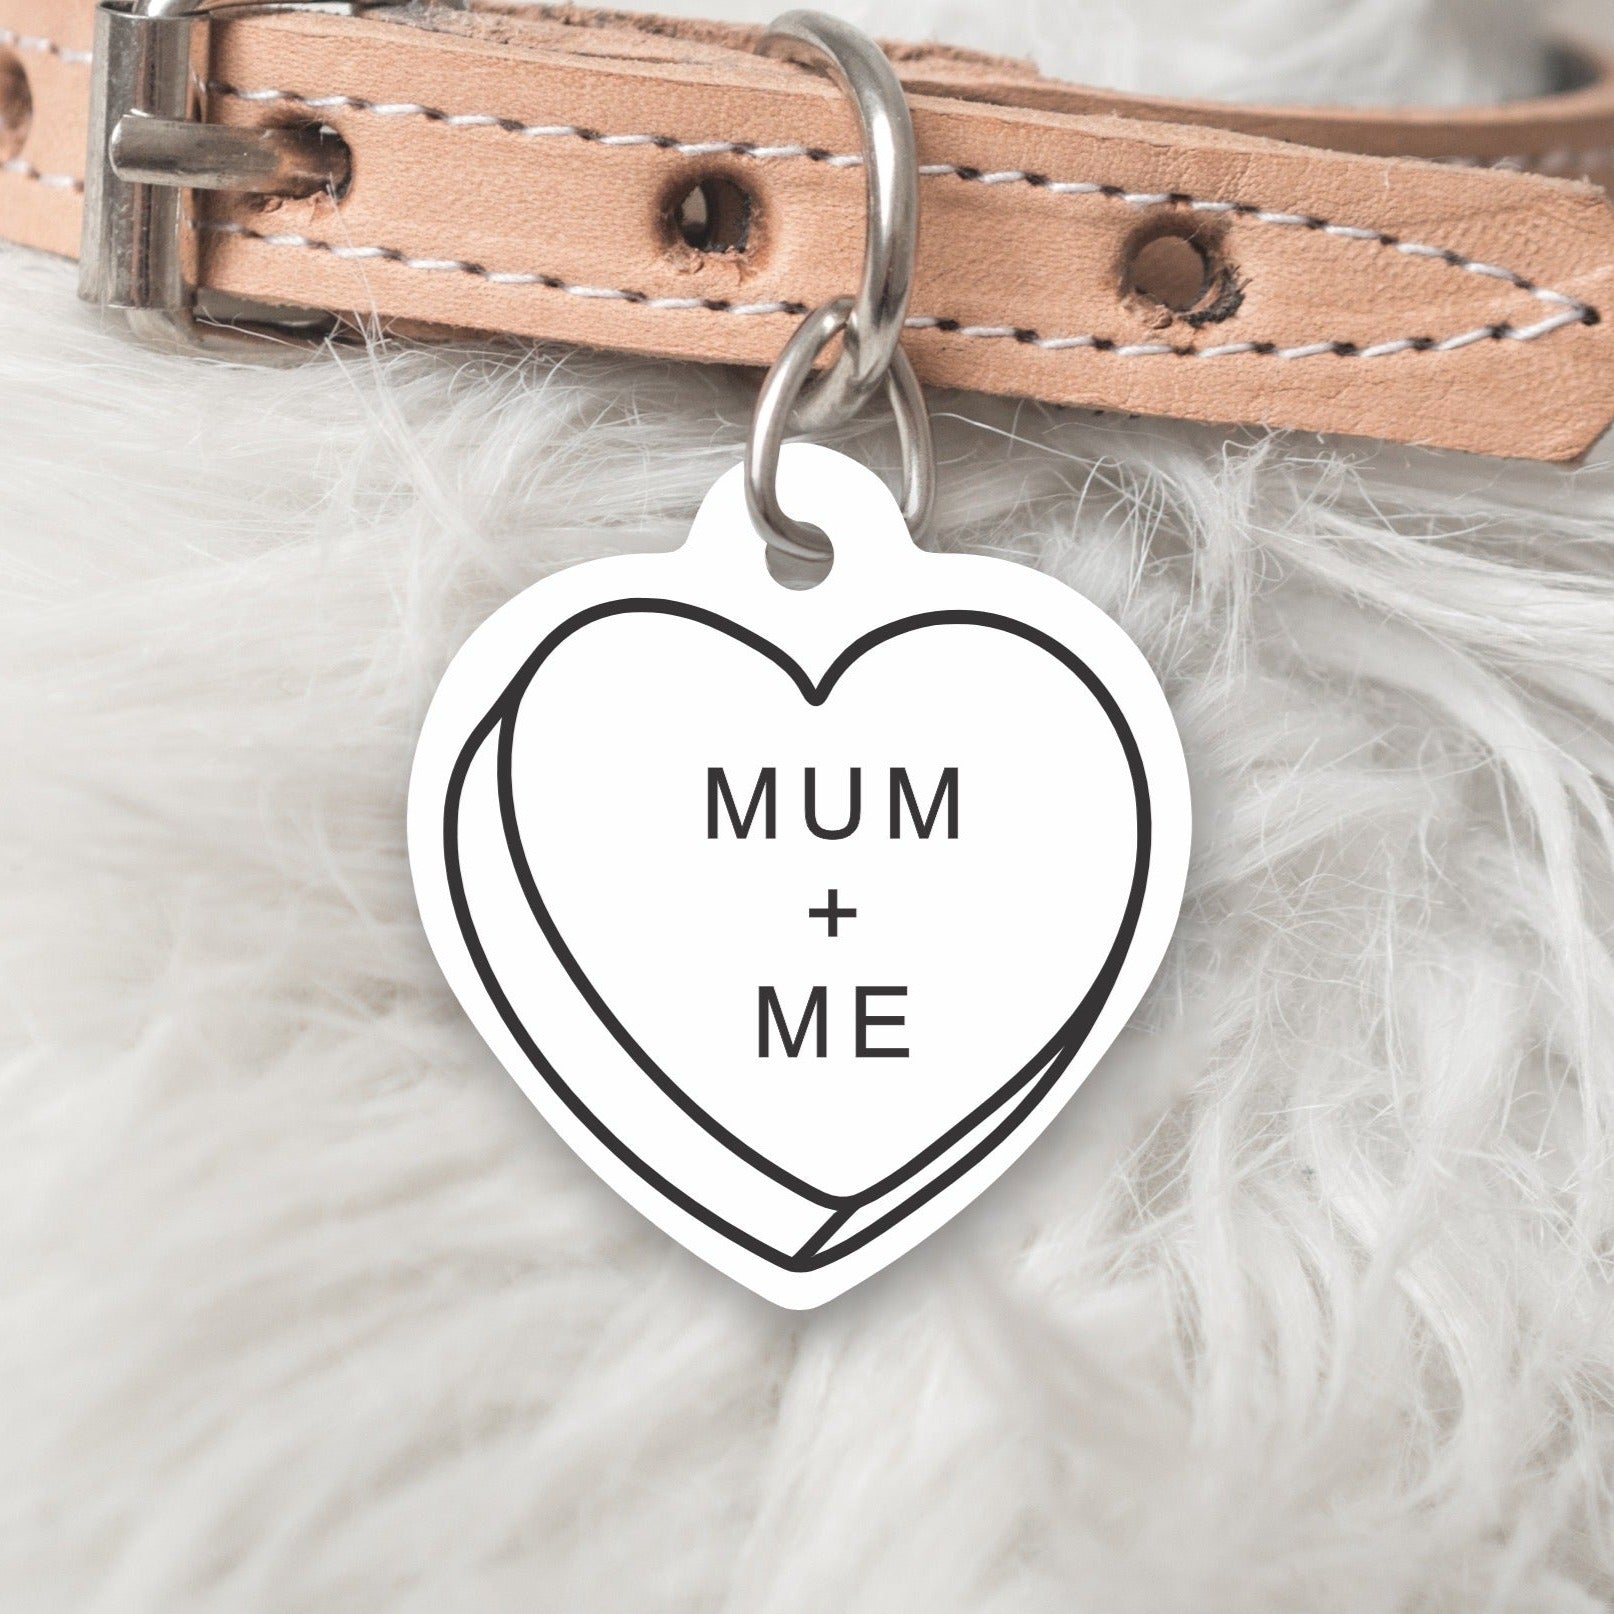 VALENTINES EDITION  - CANDY HEART  Dog or Cat Tag - MUM + ME